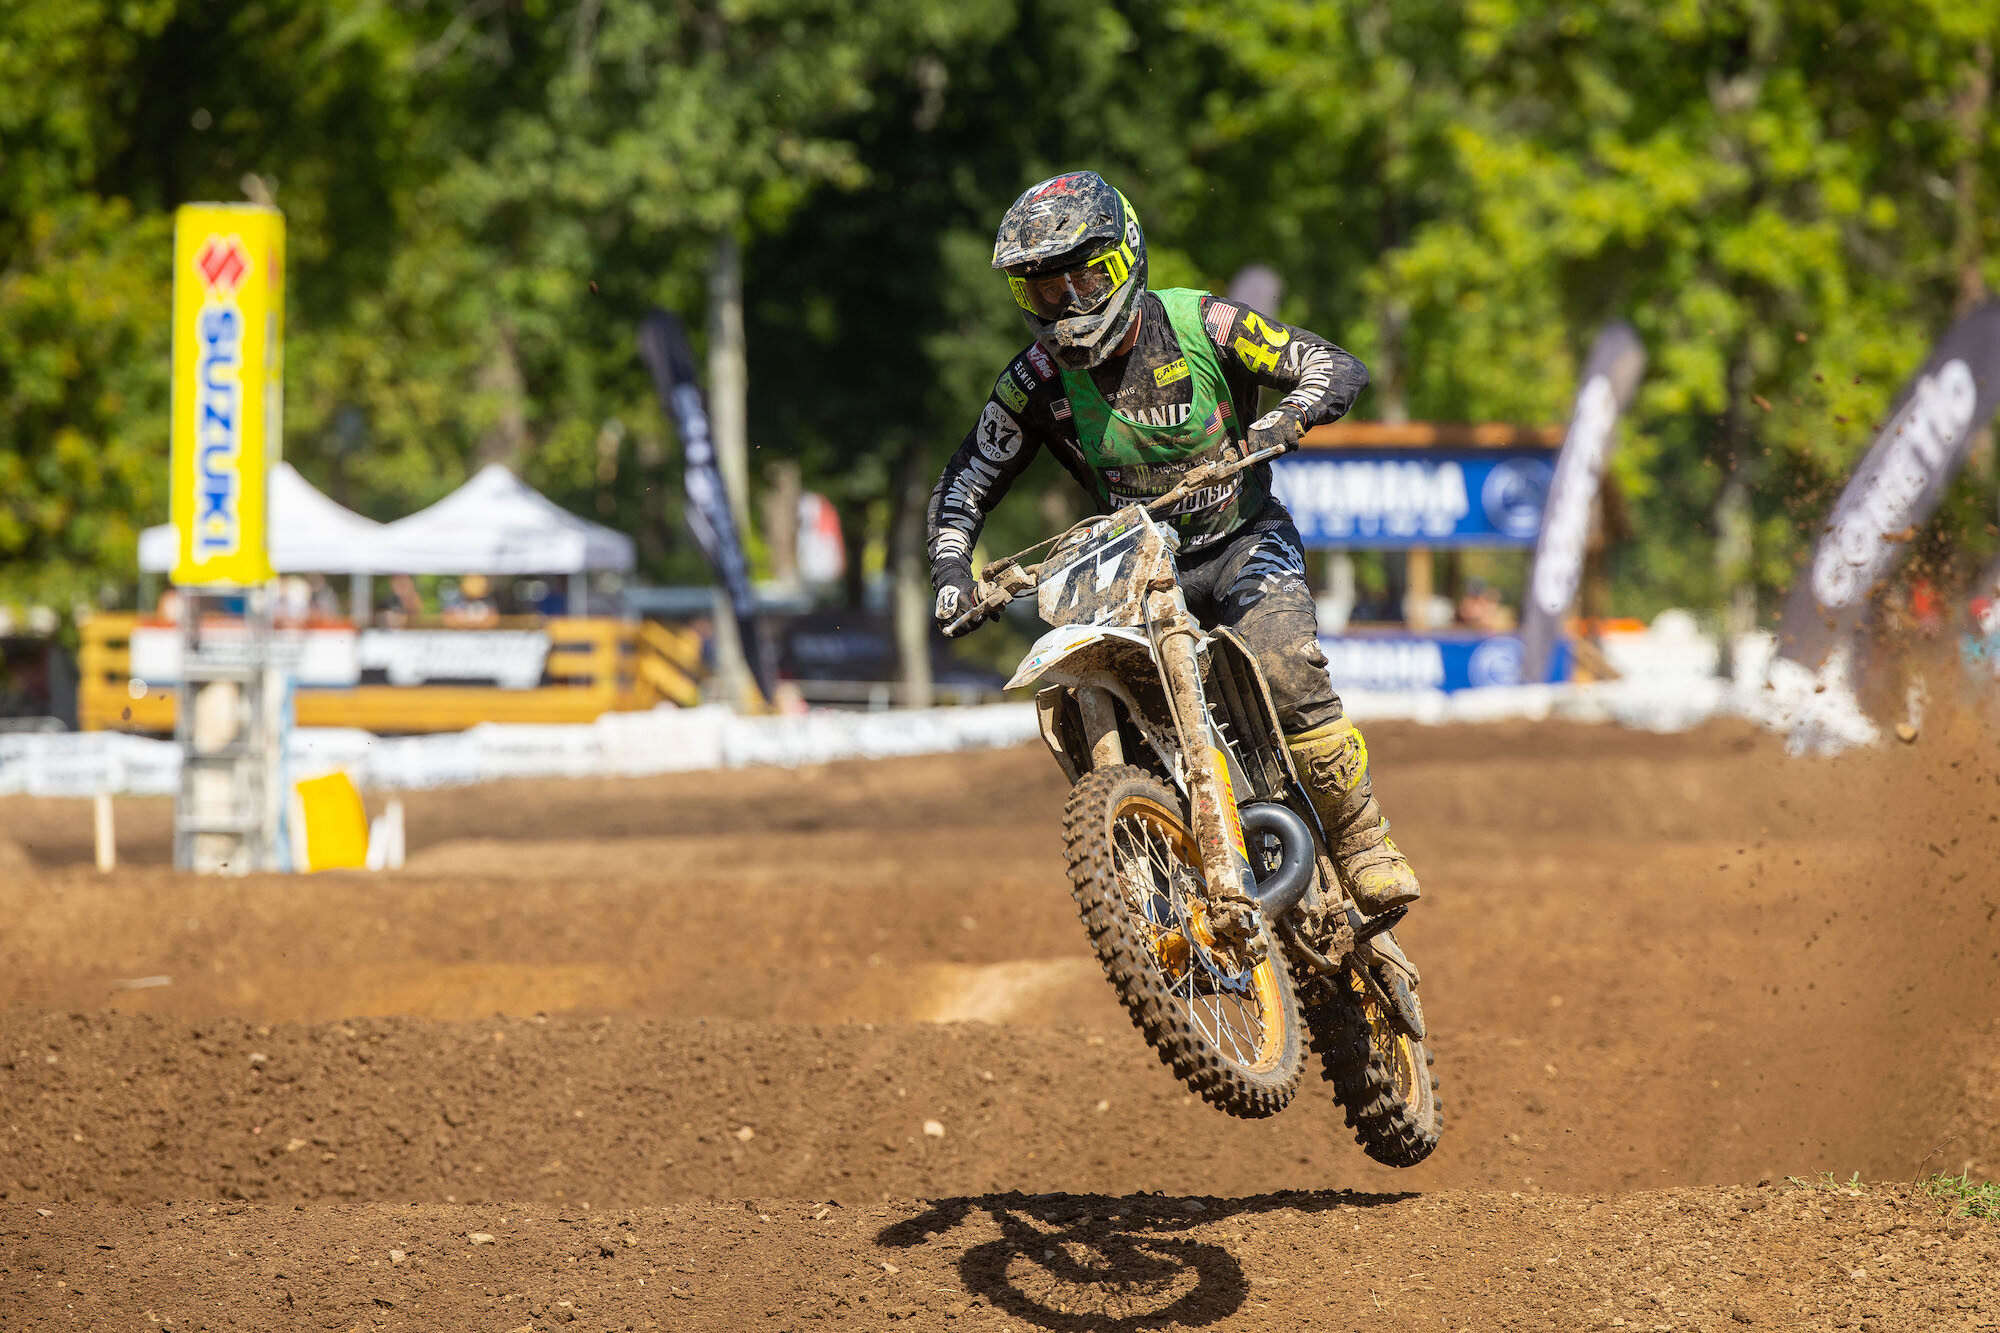 2023 Loretta Lynn's Official Rider Rosters & National Numbers